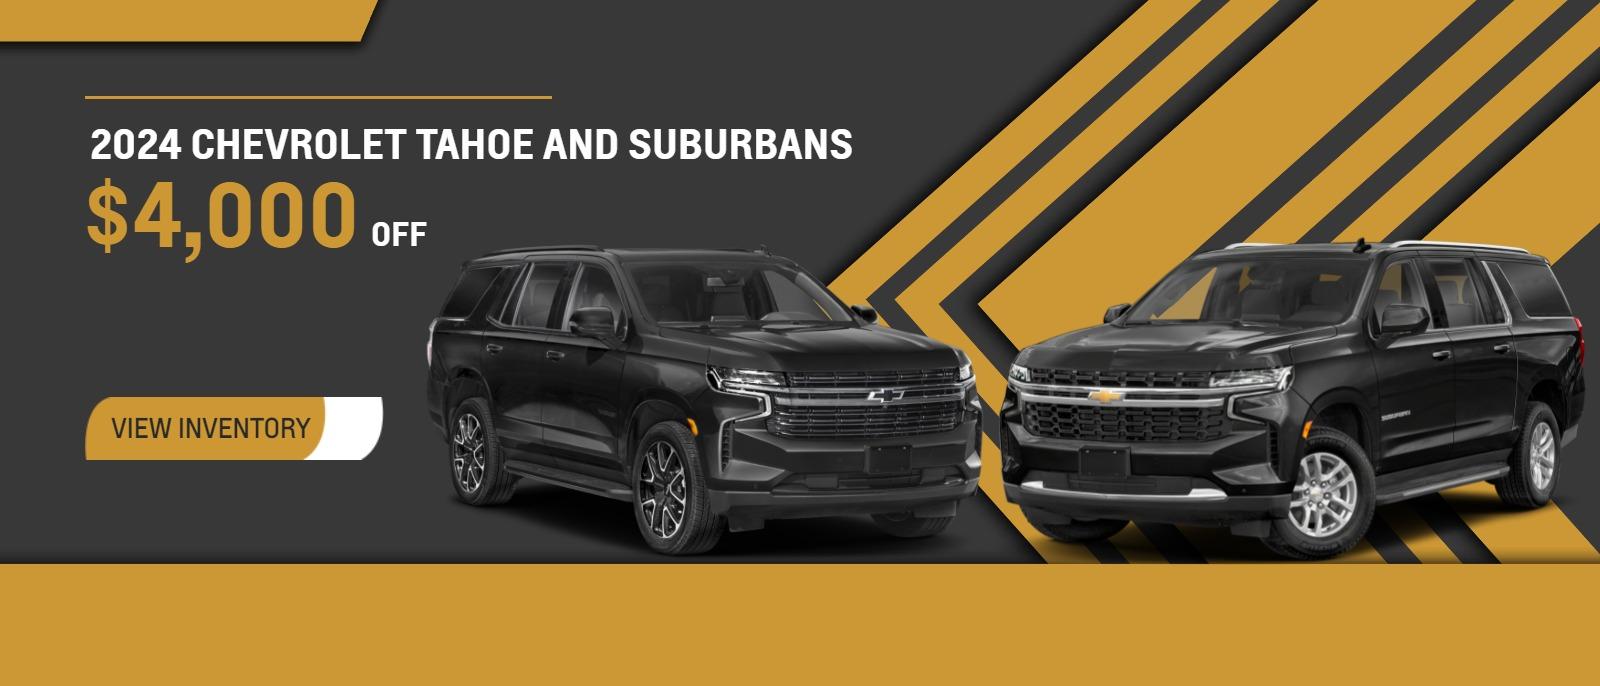 $ 4,000 OFF 2024 CHEVROLET TAHOE AND SUBURBANS